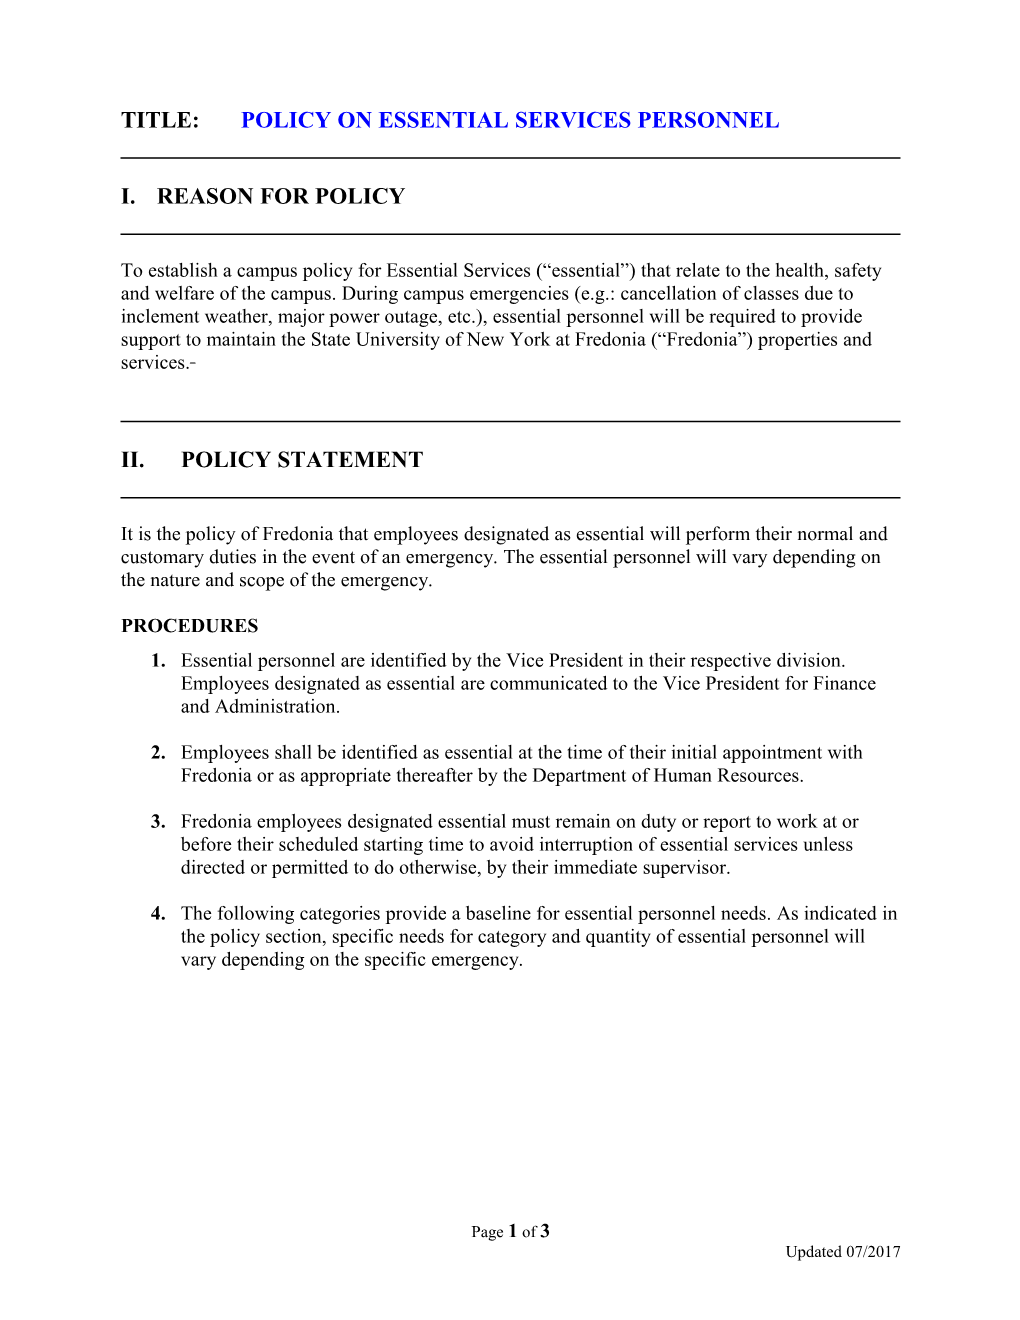 Title:Policy on Essential Services Personnel